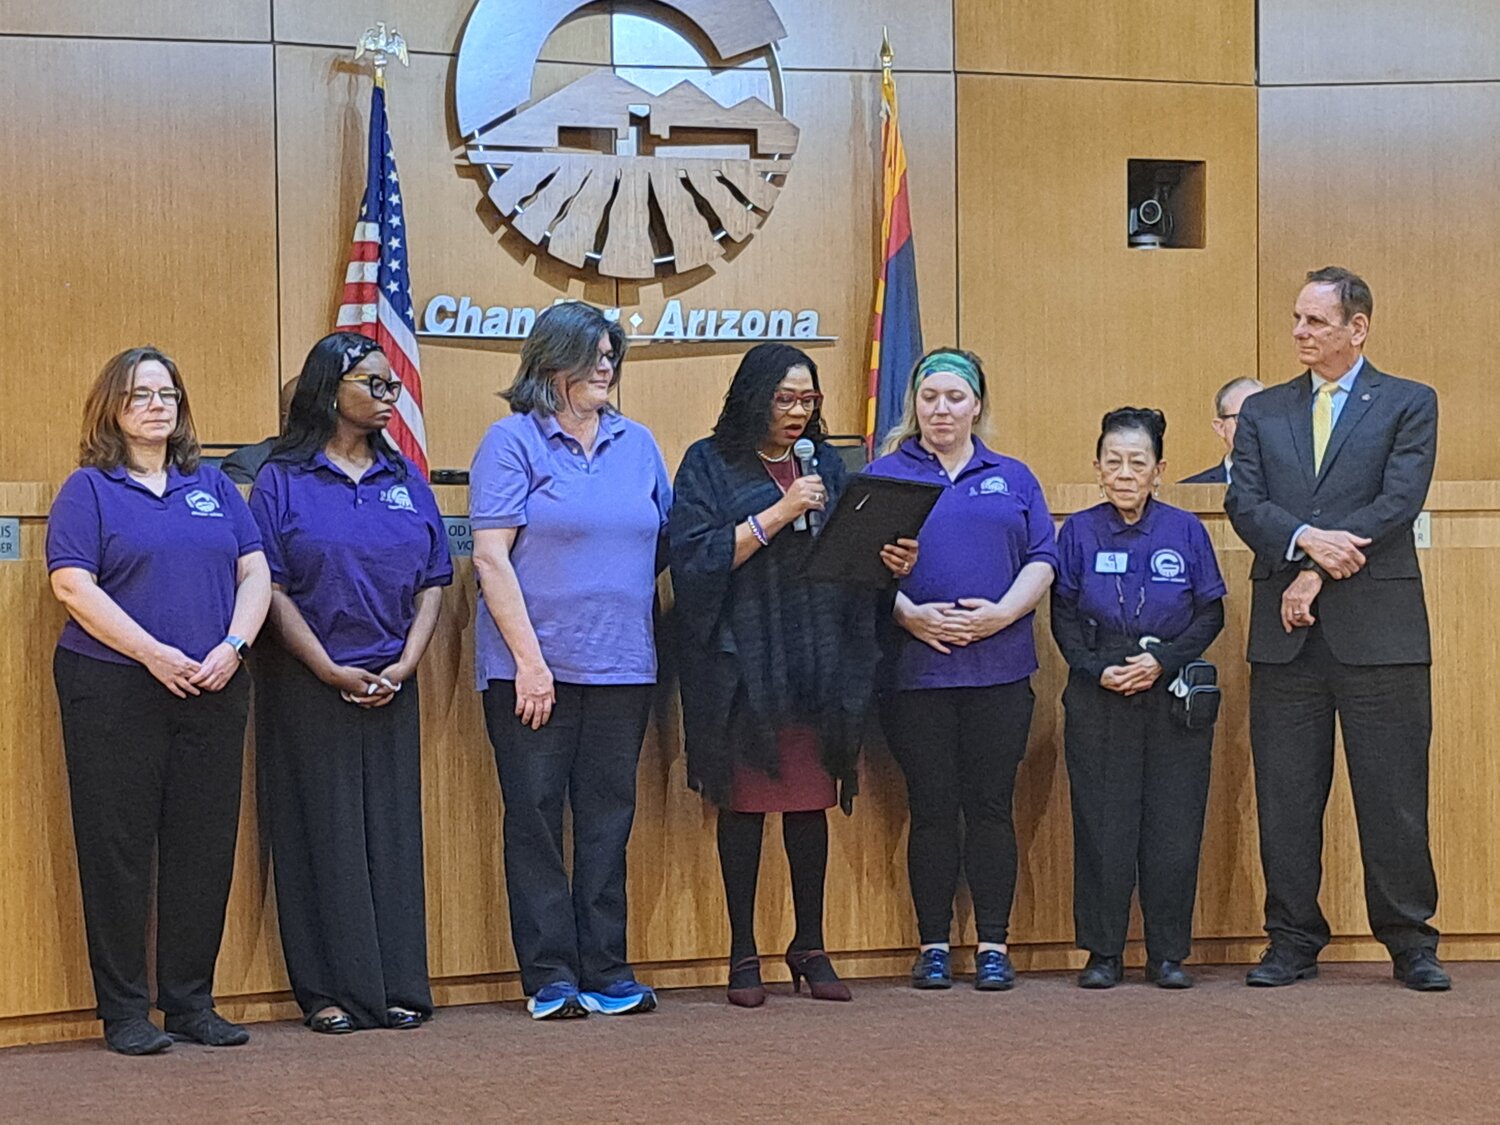 At the Chandler City Council’s Feb. 5 study session, Council member Christine Ellis read a proclamation about teen dating violence prevention. From the left are Katie Cain, Chandler Domestic Violence Commission staff liaison; Chandler Domestic Violence Commissioner LaTisha Codkind, D.C. (Delores) Ernst, vice chair of the Maricopa Association of Governments Regional Domestic Violence Council; Council member Ellis; Chandler Domestic Violence Commissioners Chelsea Grieve and Dr. Ruth Tan Lim and Mayor Kevin Hartke.